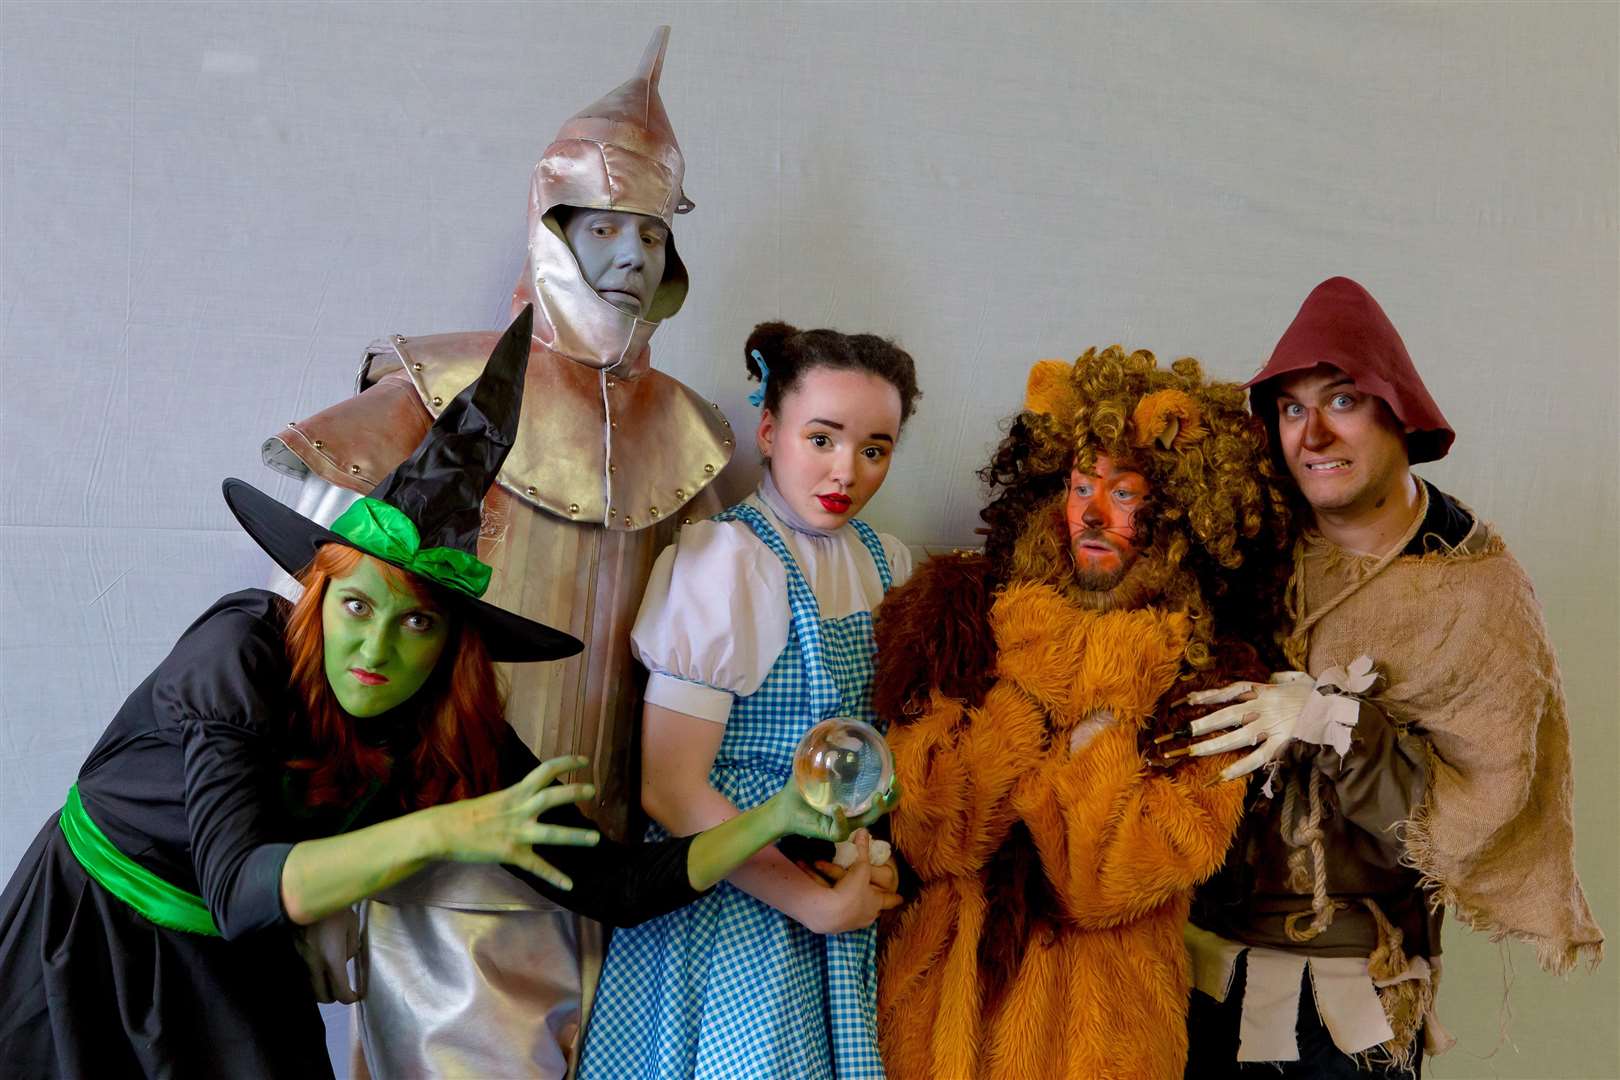 Wizard of Oz characters are at Groombridge for a fortnight